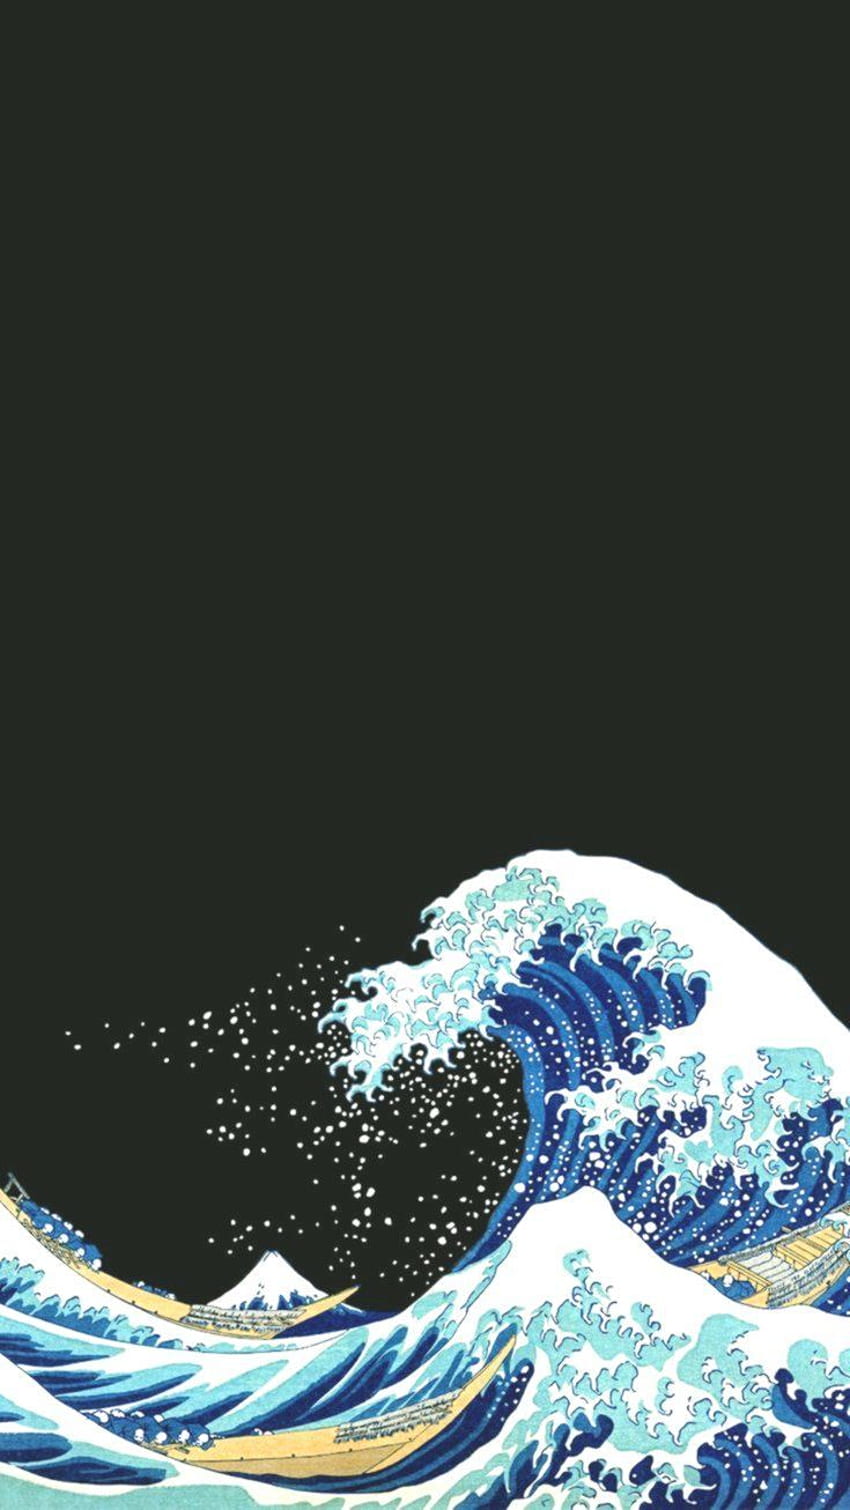 Japanese Wave Wallpaper Is It the Best for Home